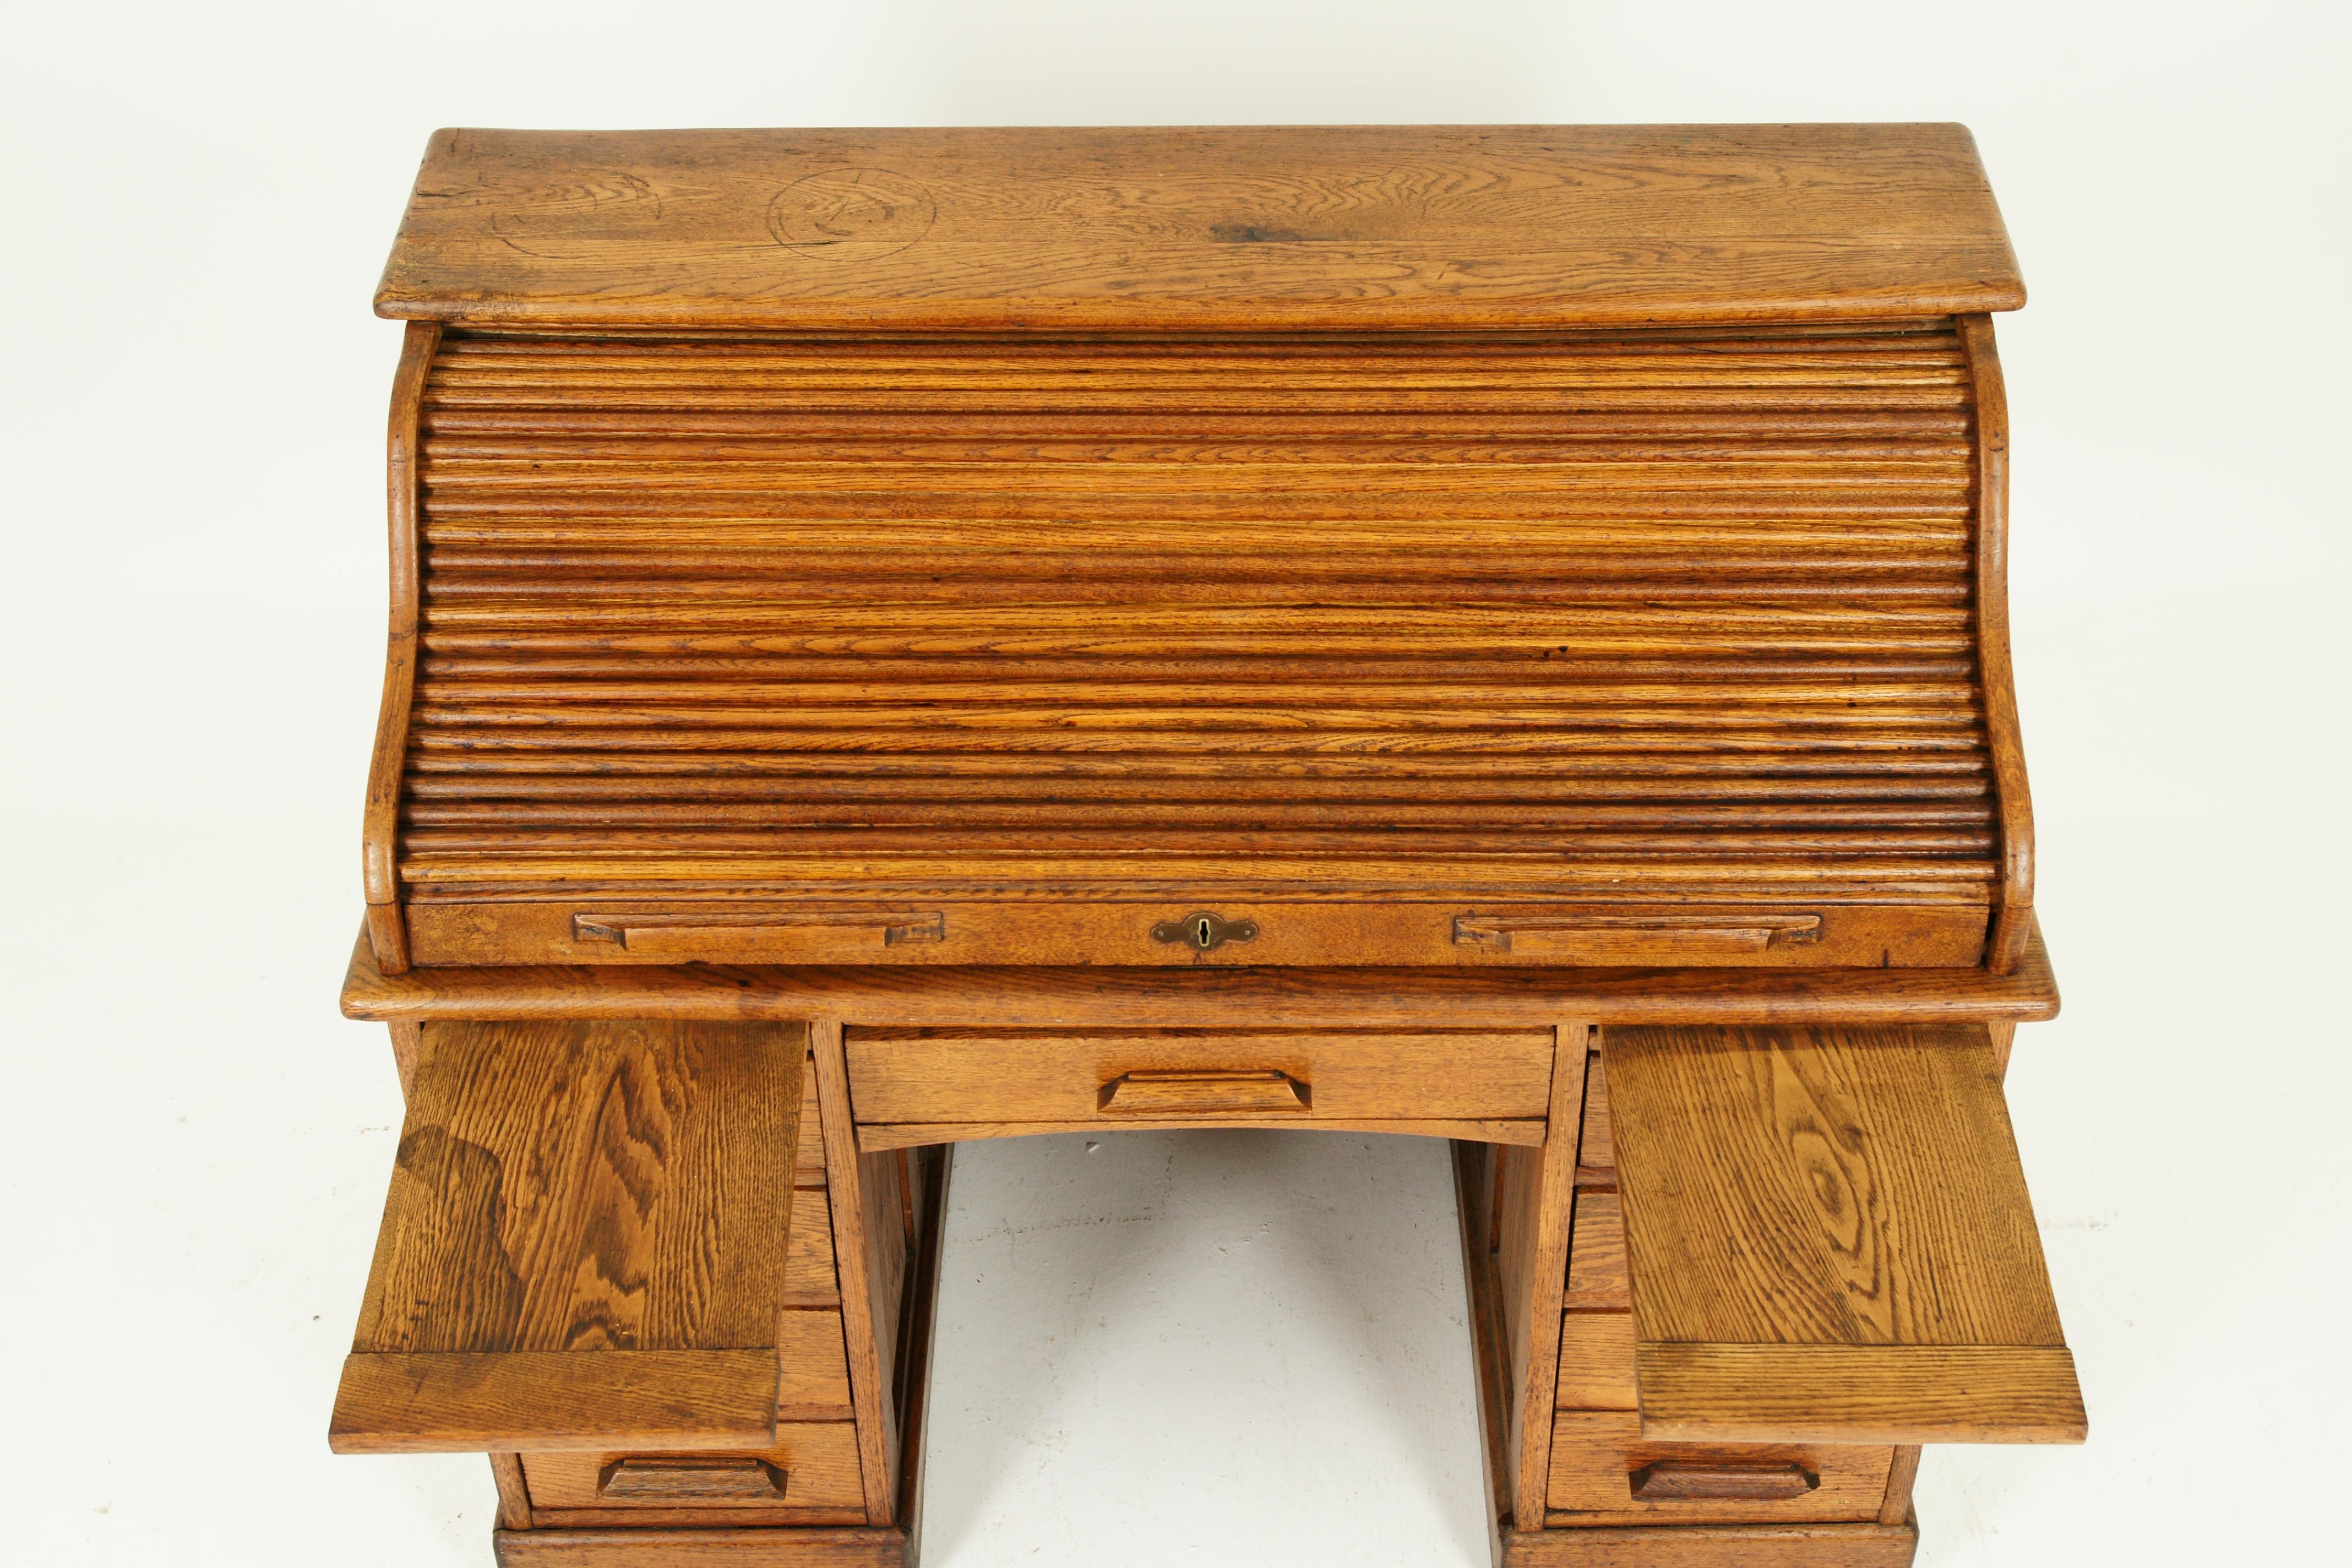 Antique roll top desk, antique desk, oak, Doduble pedestal, Scotland 1910, Antique Furniture

Scotland 1910
Solid oak with original finish
S roll top runs smoothly
Opens to reveal eight pigeon hole, pair of drawers
Letter holders on the